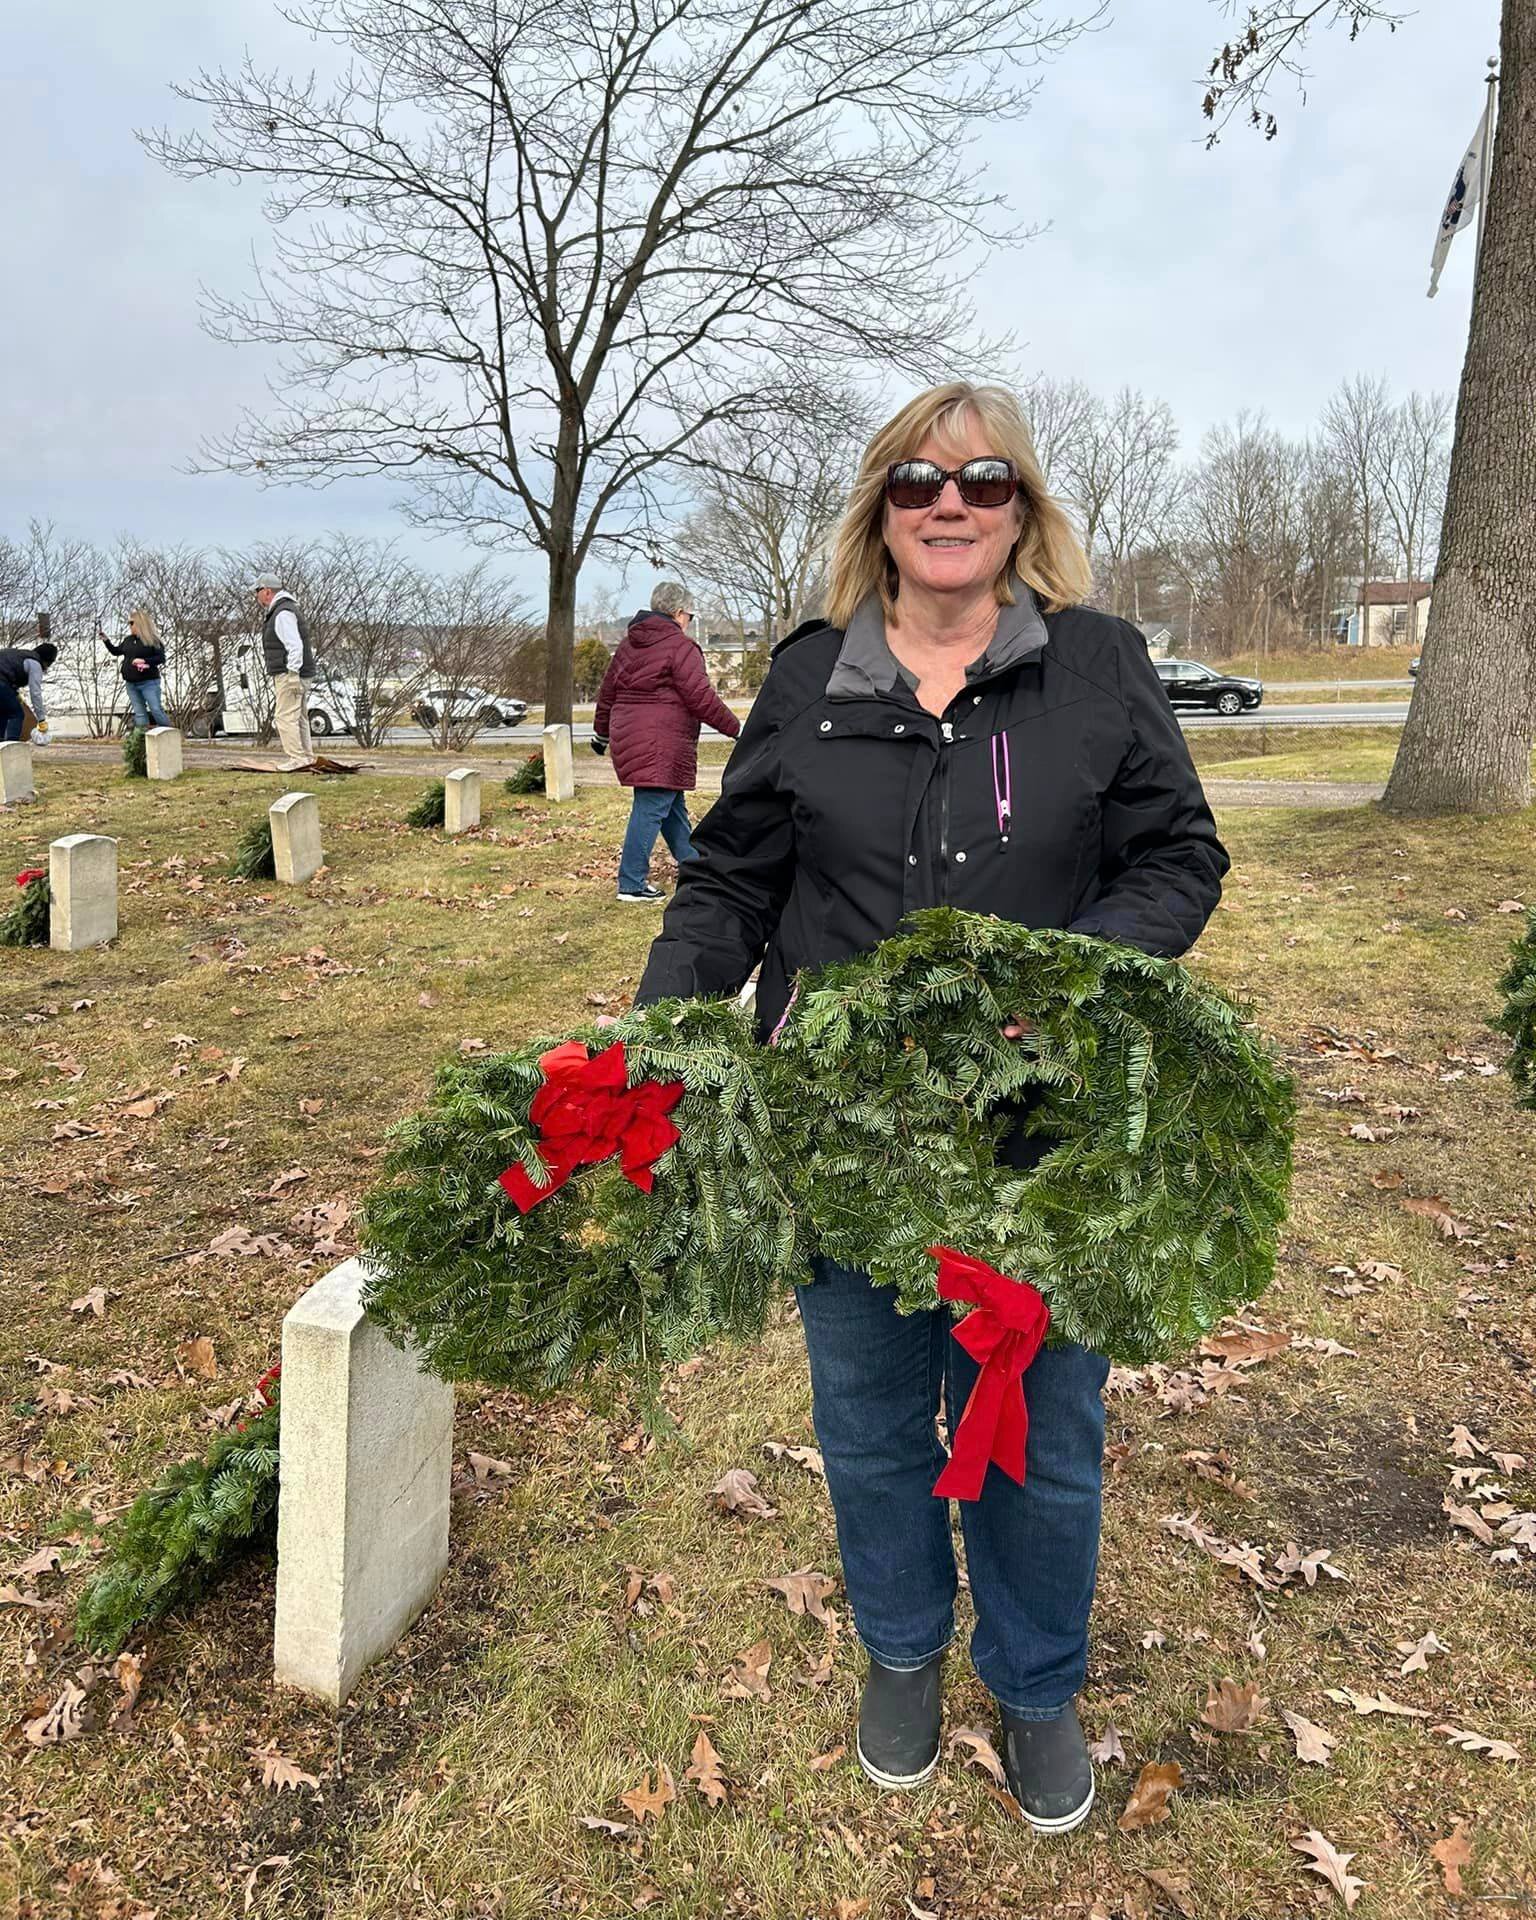 Our chapter helped lay wreaths at the Grand Rapids Veterans&rsquo; Cemetery yesterday. Together, we helped to sponsor over 800 wreaths. May we never forget their service and sacrifice. #TodaysDAR #LestWeForget #wreathsacrossamerica